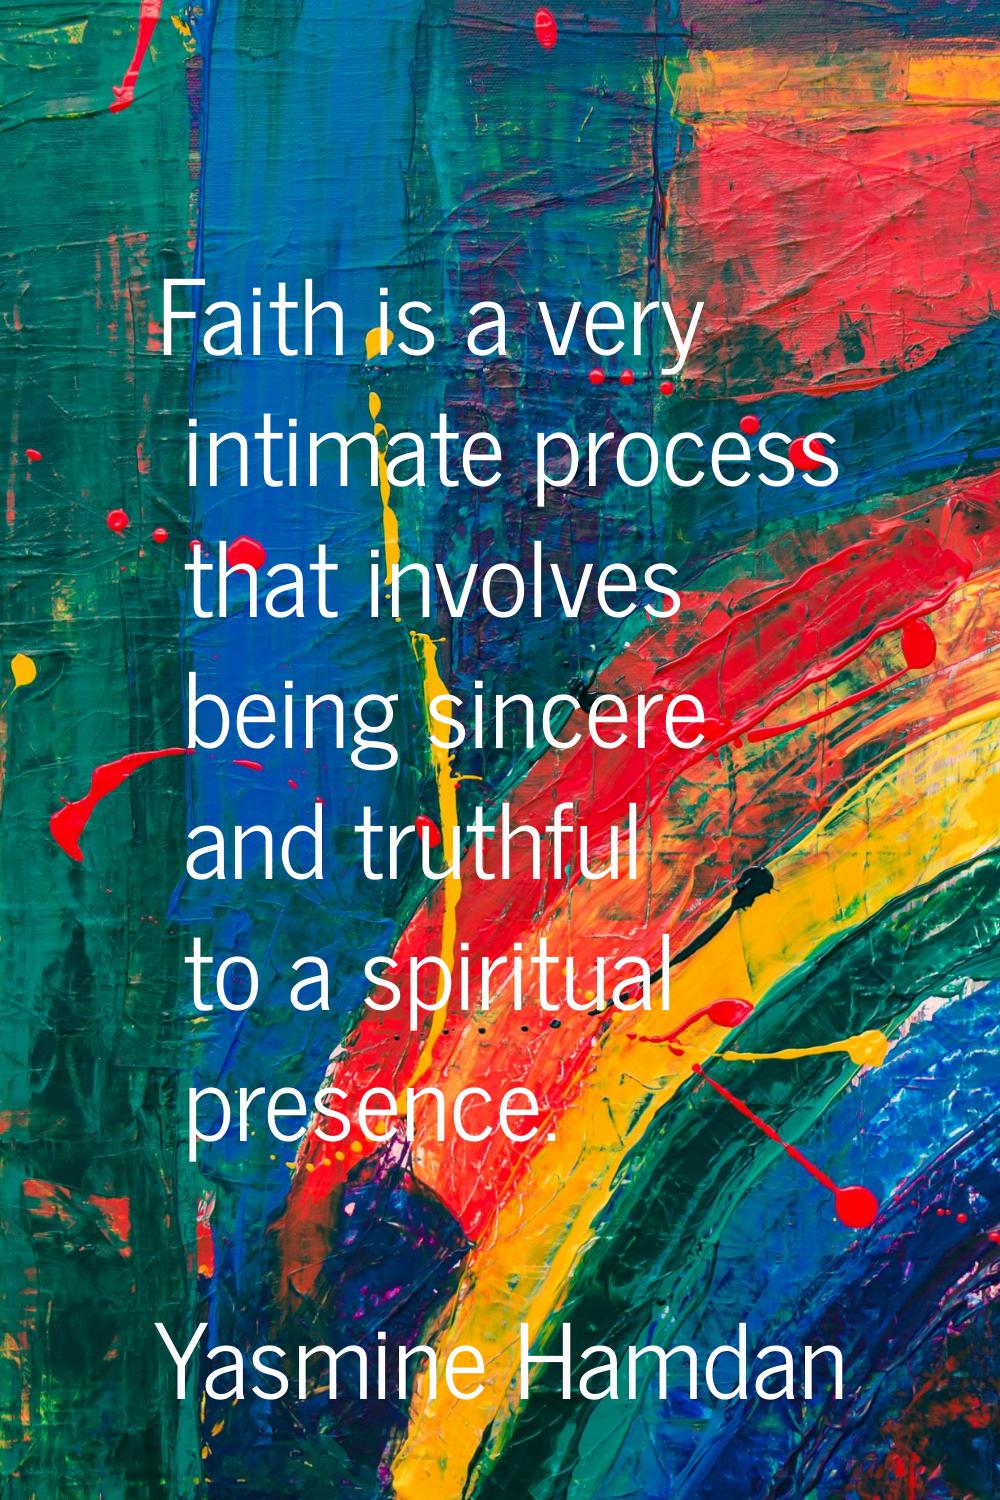 Faith is a very intimate process that involves being sincere and truthful to a spiritual presence.